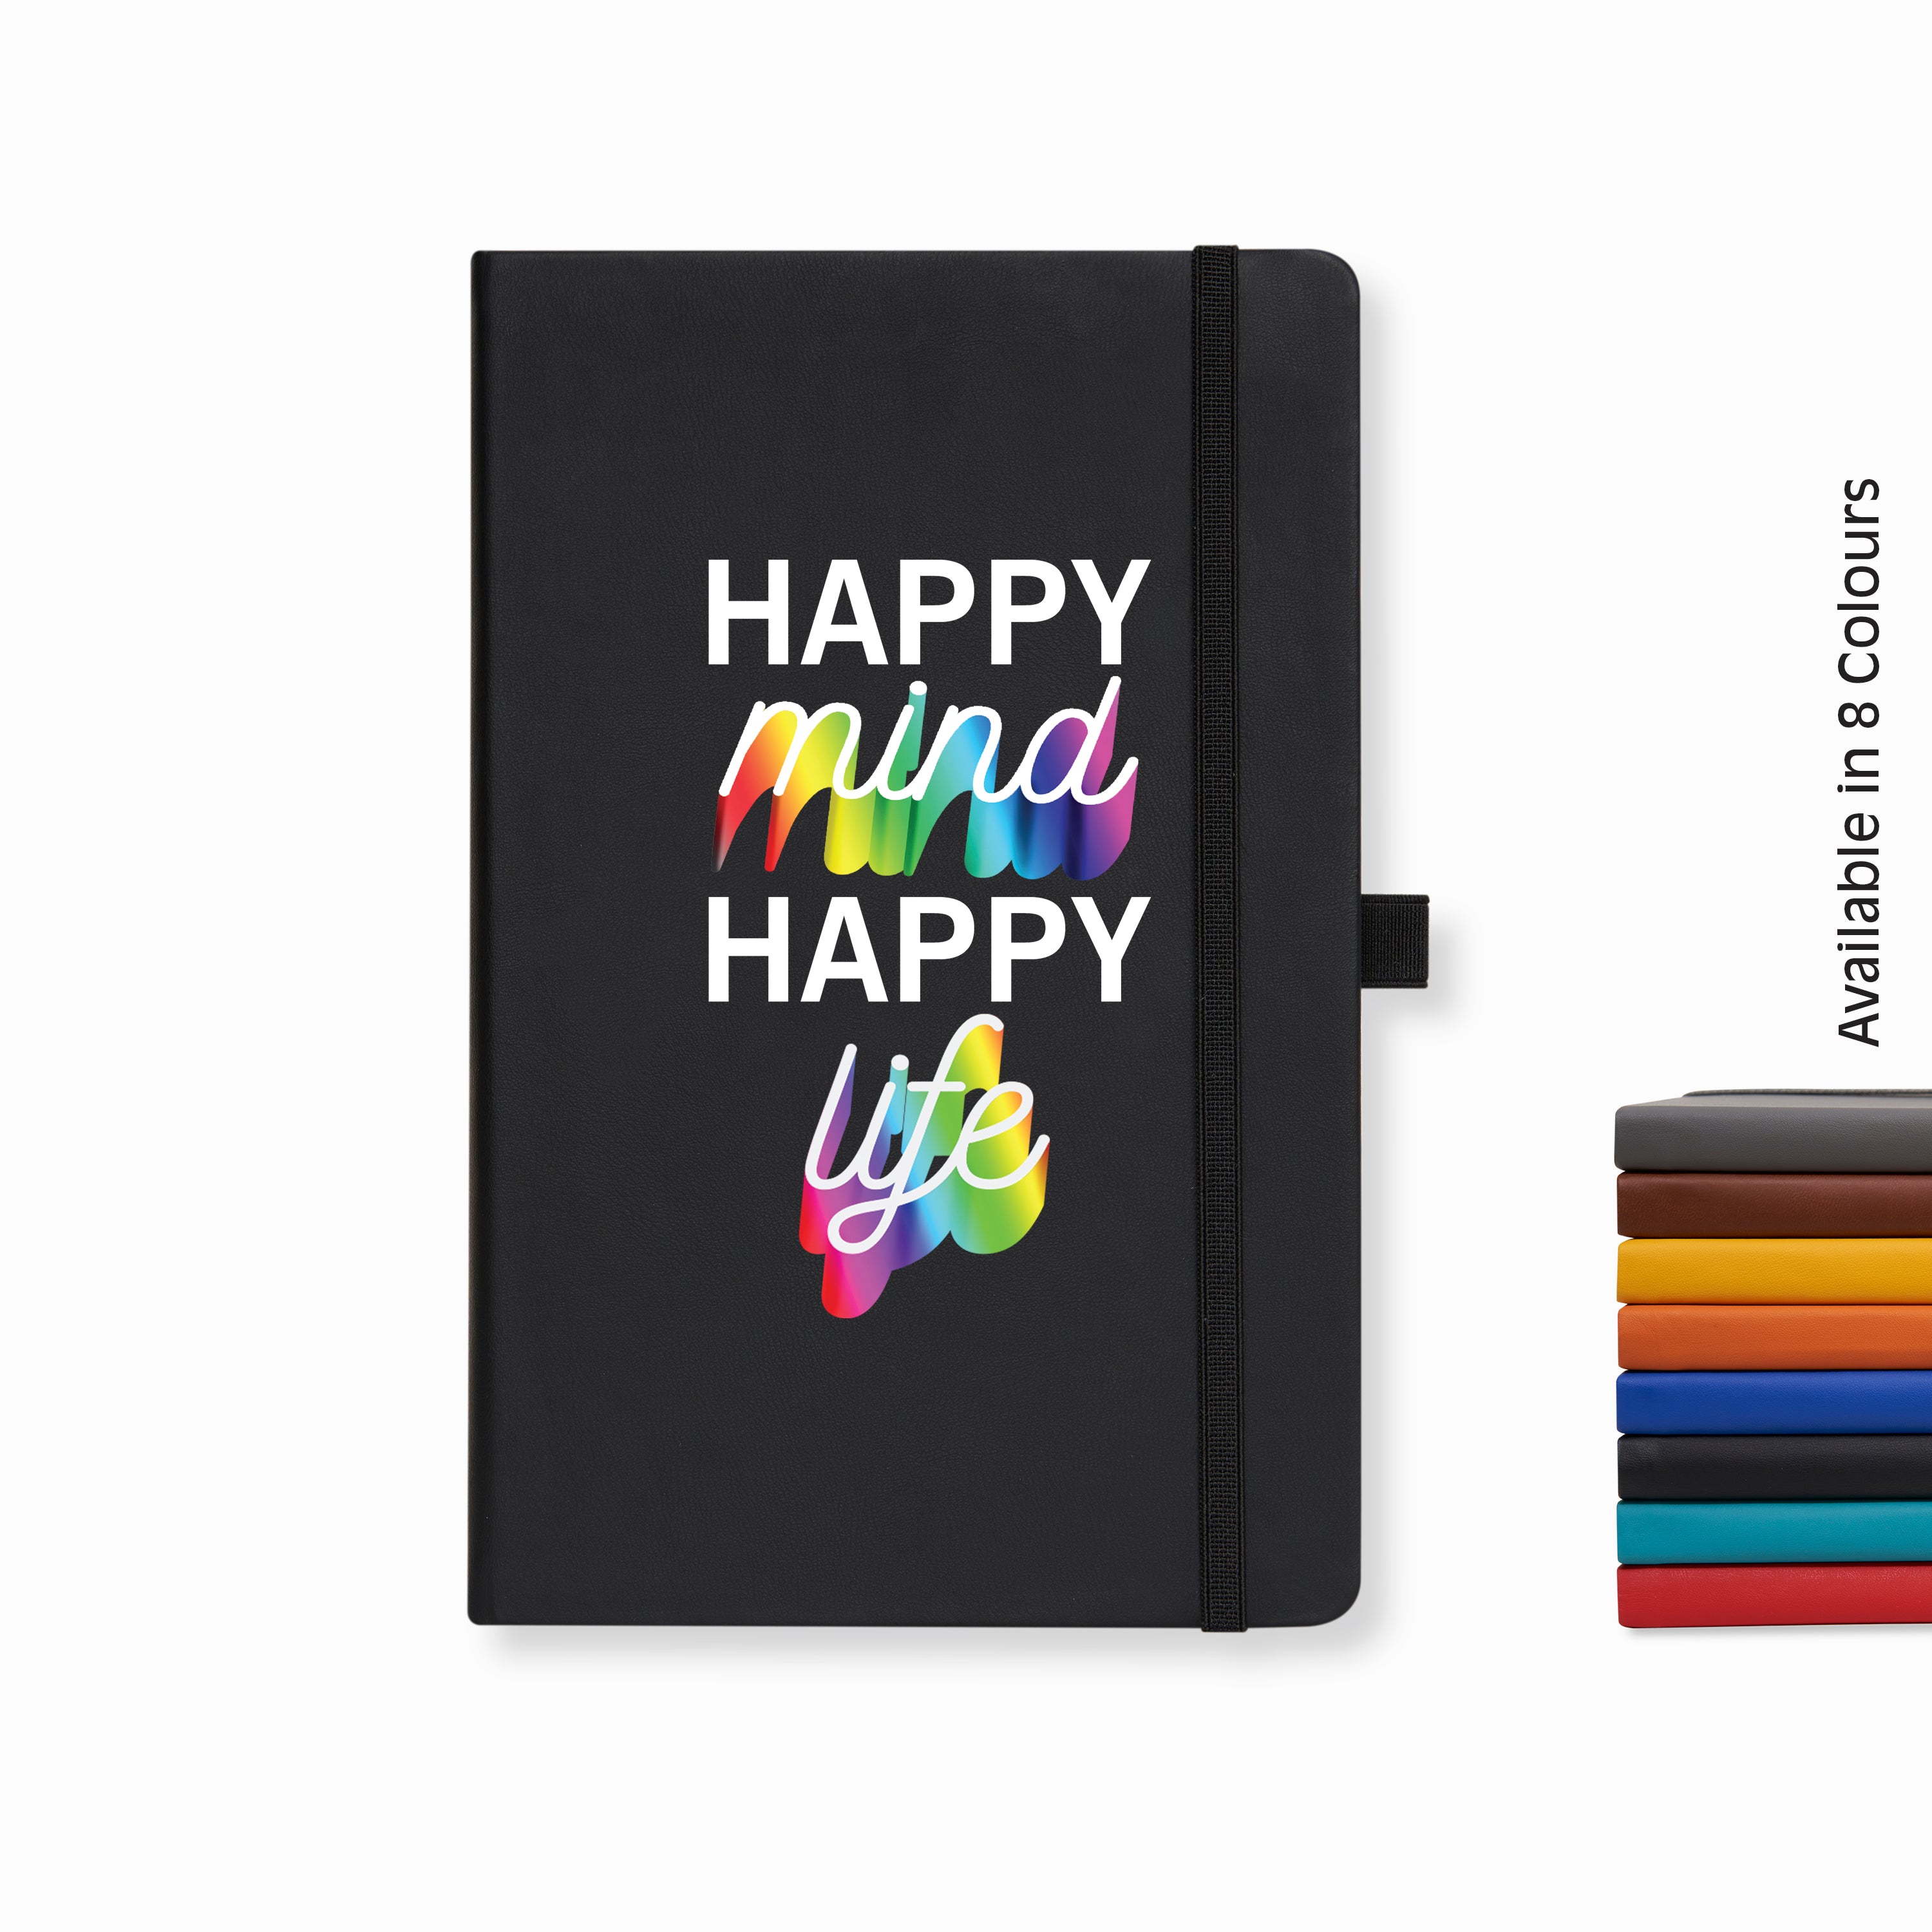 Doodle Pro Series Executive A5 PU Leather Hardbound Ruled Black Notebook with Pen Loop [Happy Mind Happy Life]